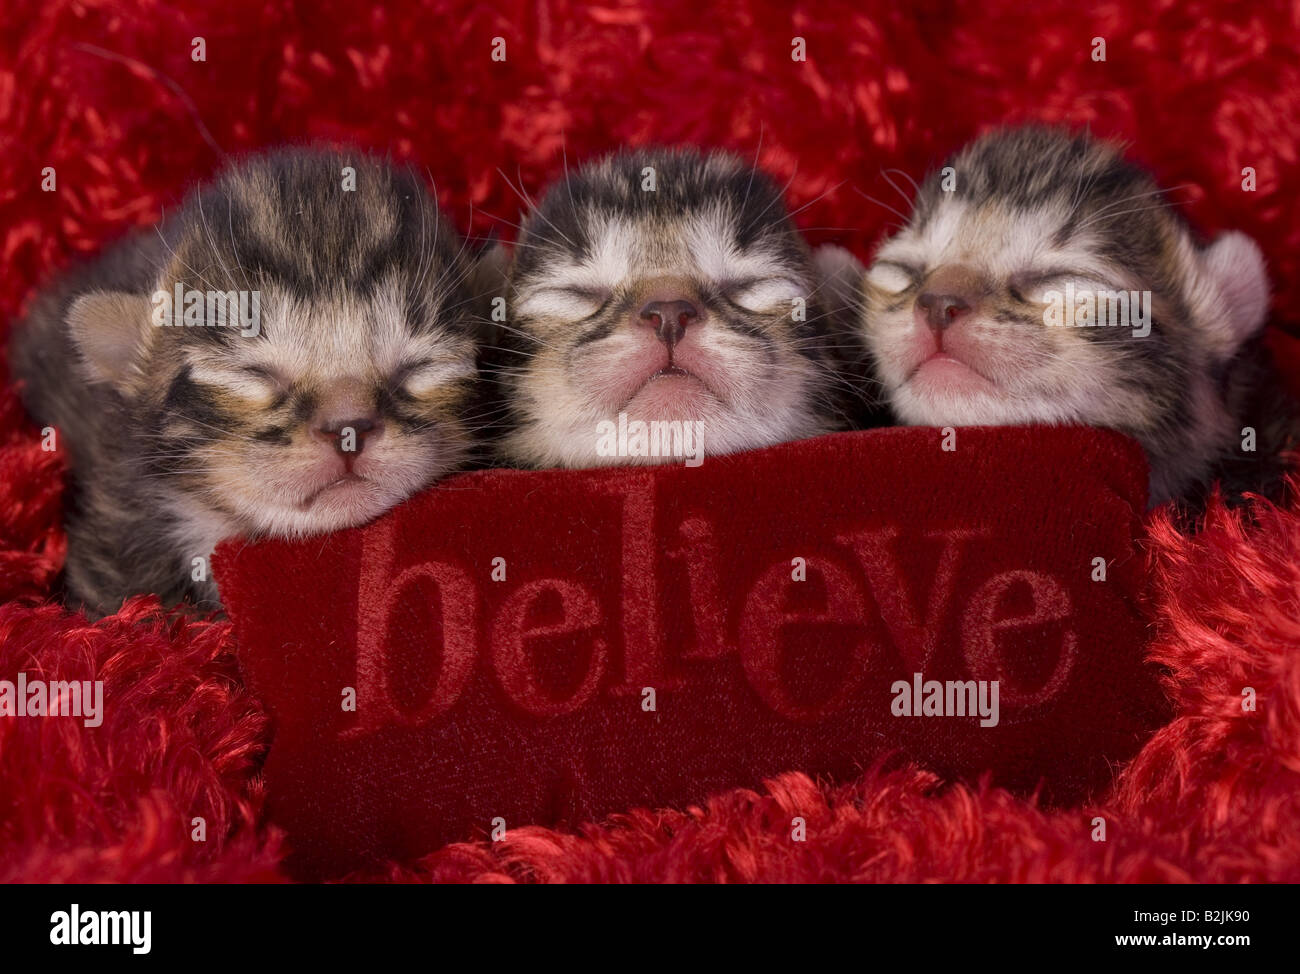 Three newborn kittens on red backgound on pillow that says Believe Stock Photo